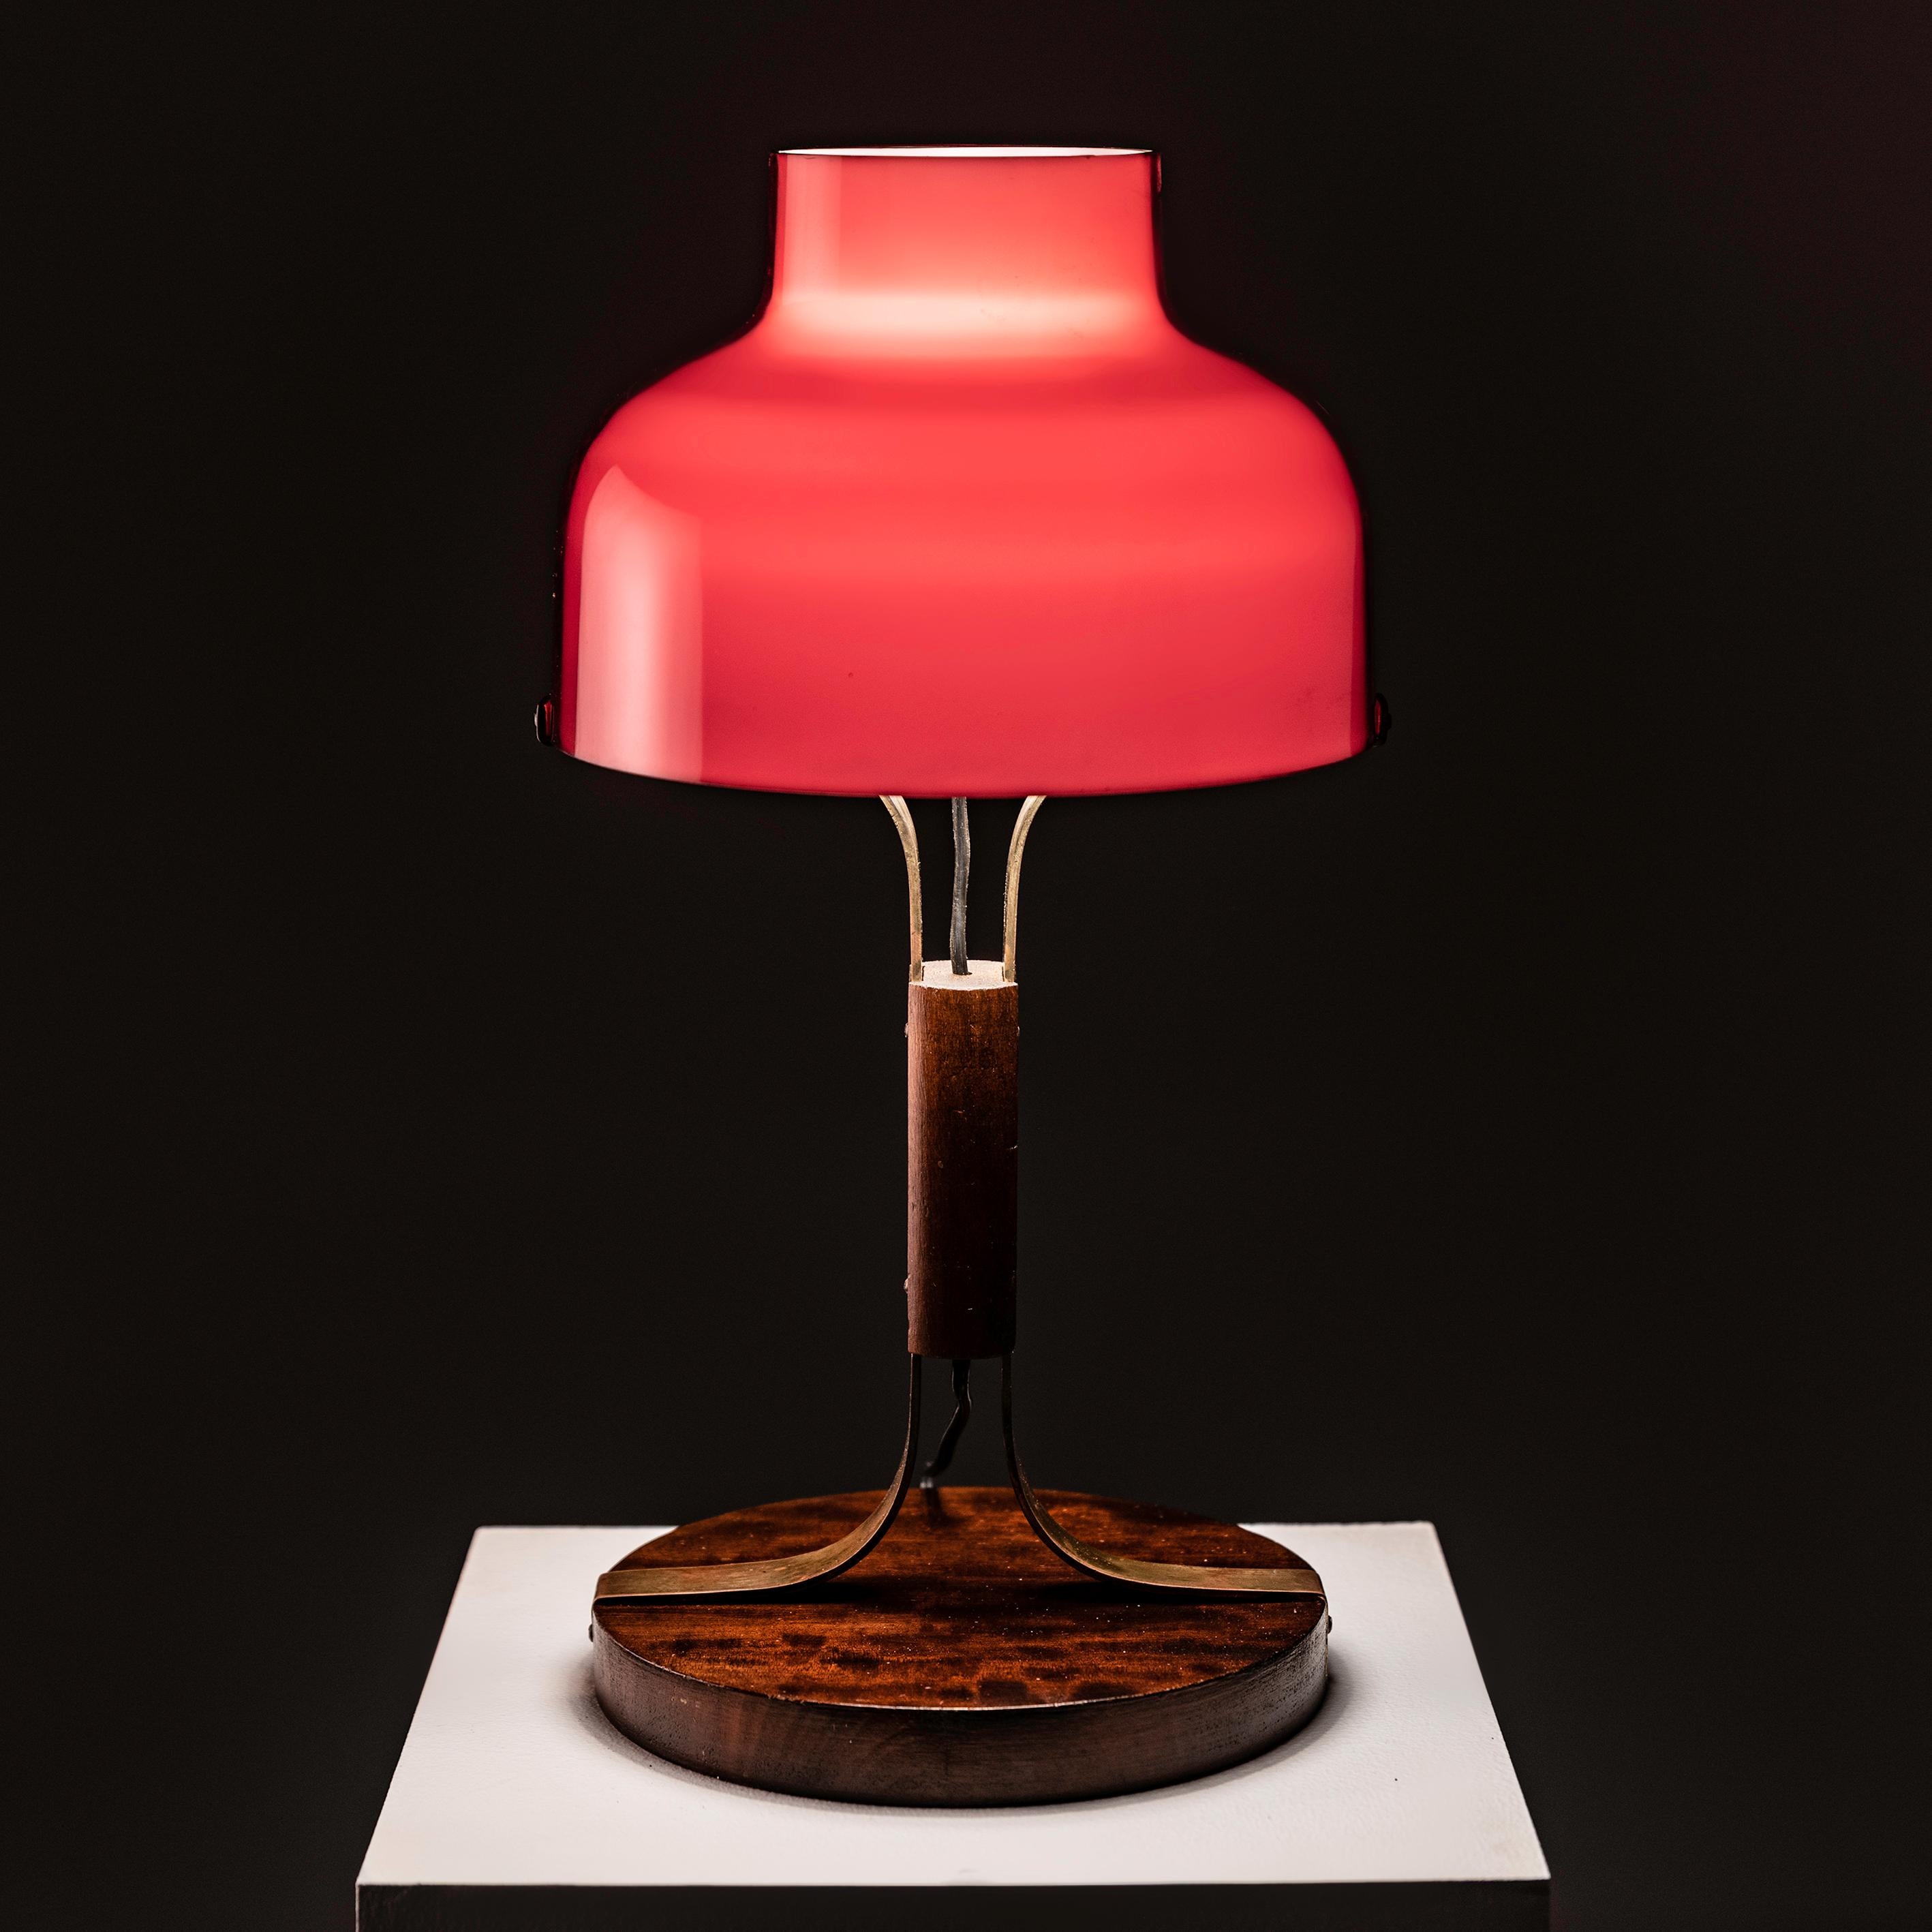 Investing in the Max Bill table lamp designed by Miguel Mila for Polinax in Spain during the 1960s offers a remarkable opportunity to acquire a piece of iconic mid-century modern design. Miguel Mila's collaboration with Polinax resulted in a lamp